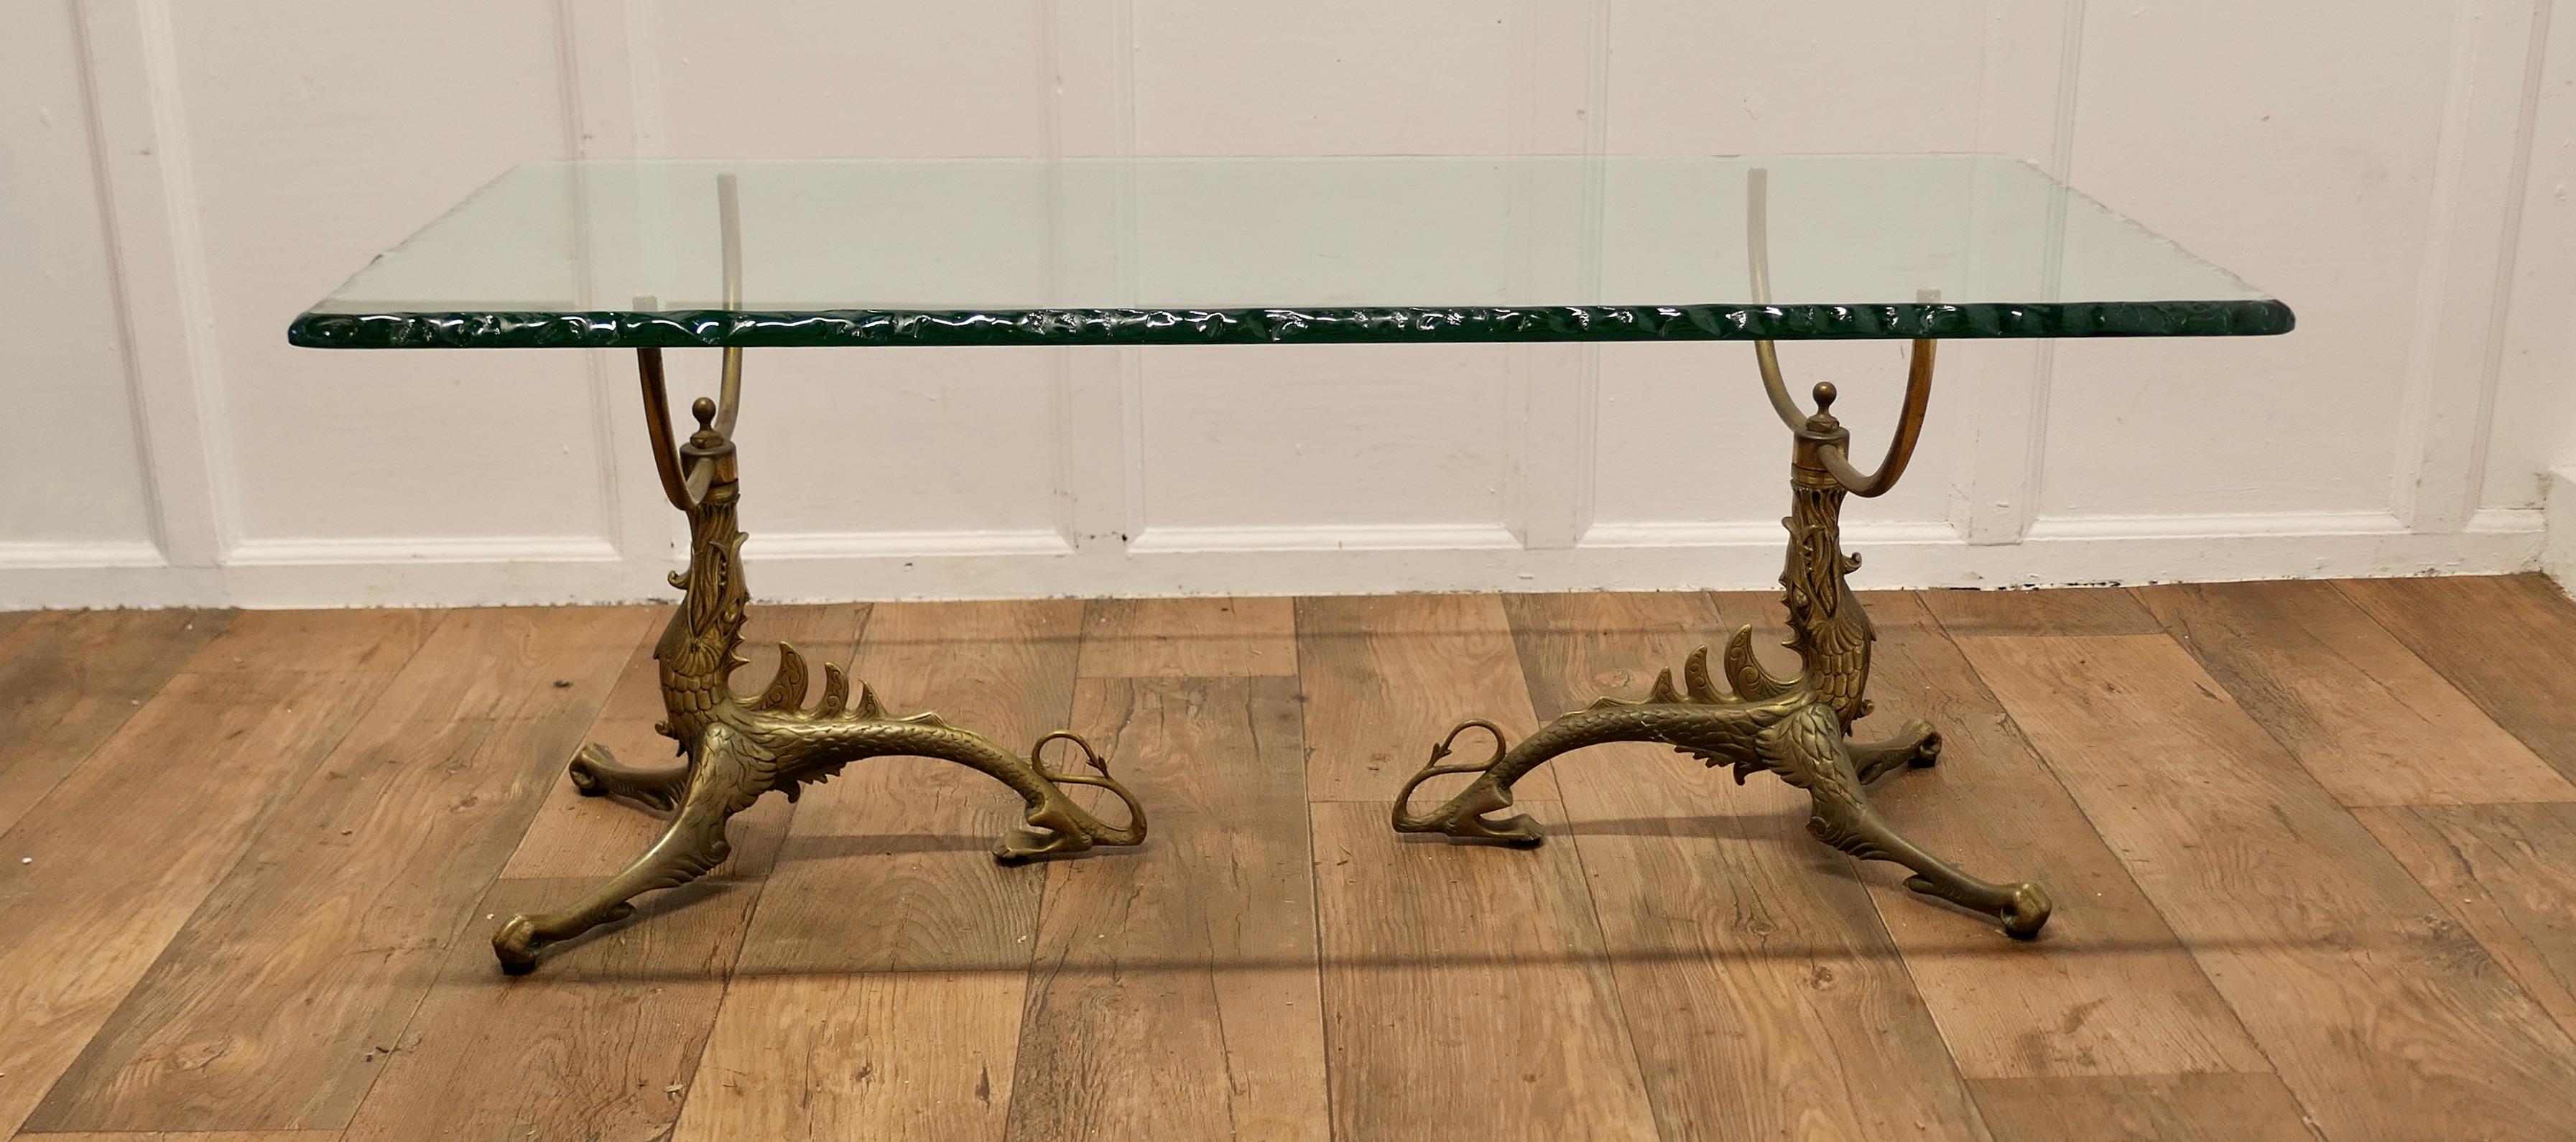 Superb Mid Century Brass and Glass Coffee Table

This design was first introduced by Jean-Danial Salvat, the 2 individual brass legs are in the form stylised dragons 

The top is rectangular with an irregular edge giving it superb shades of green